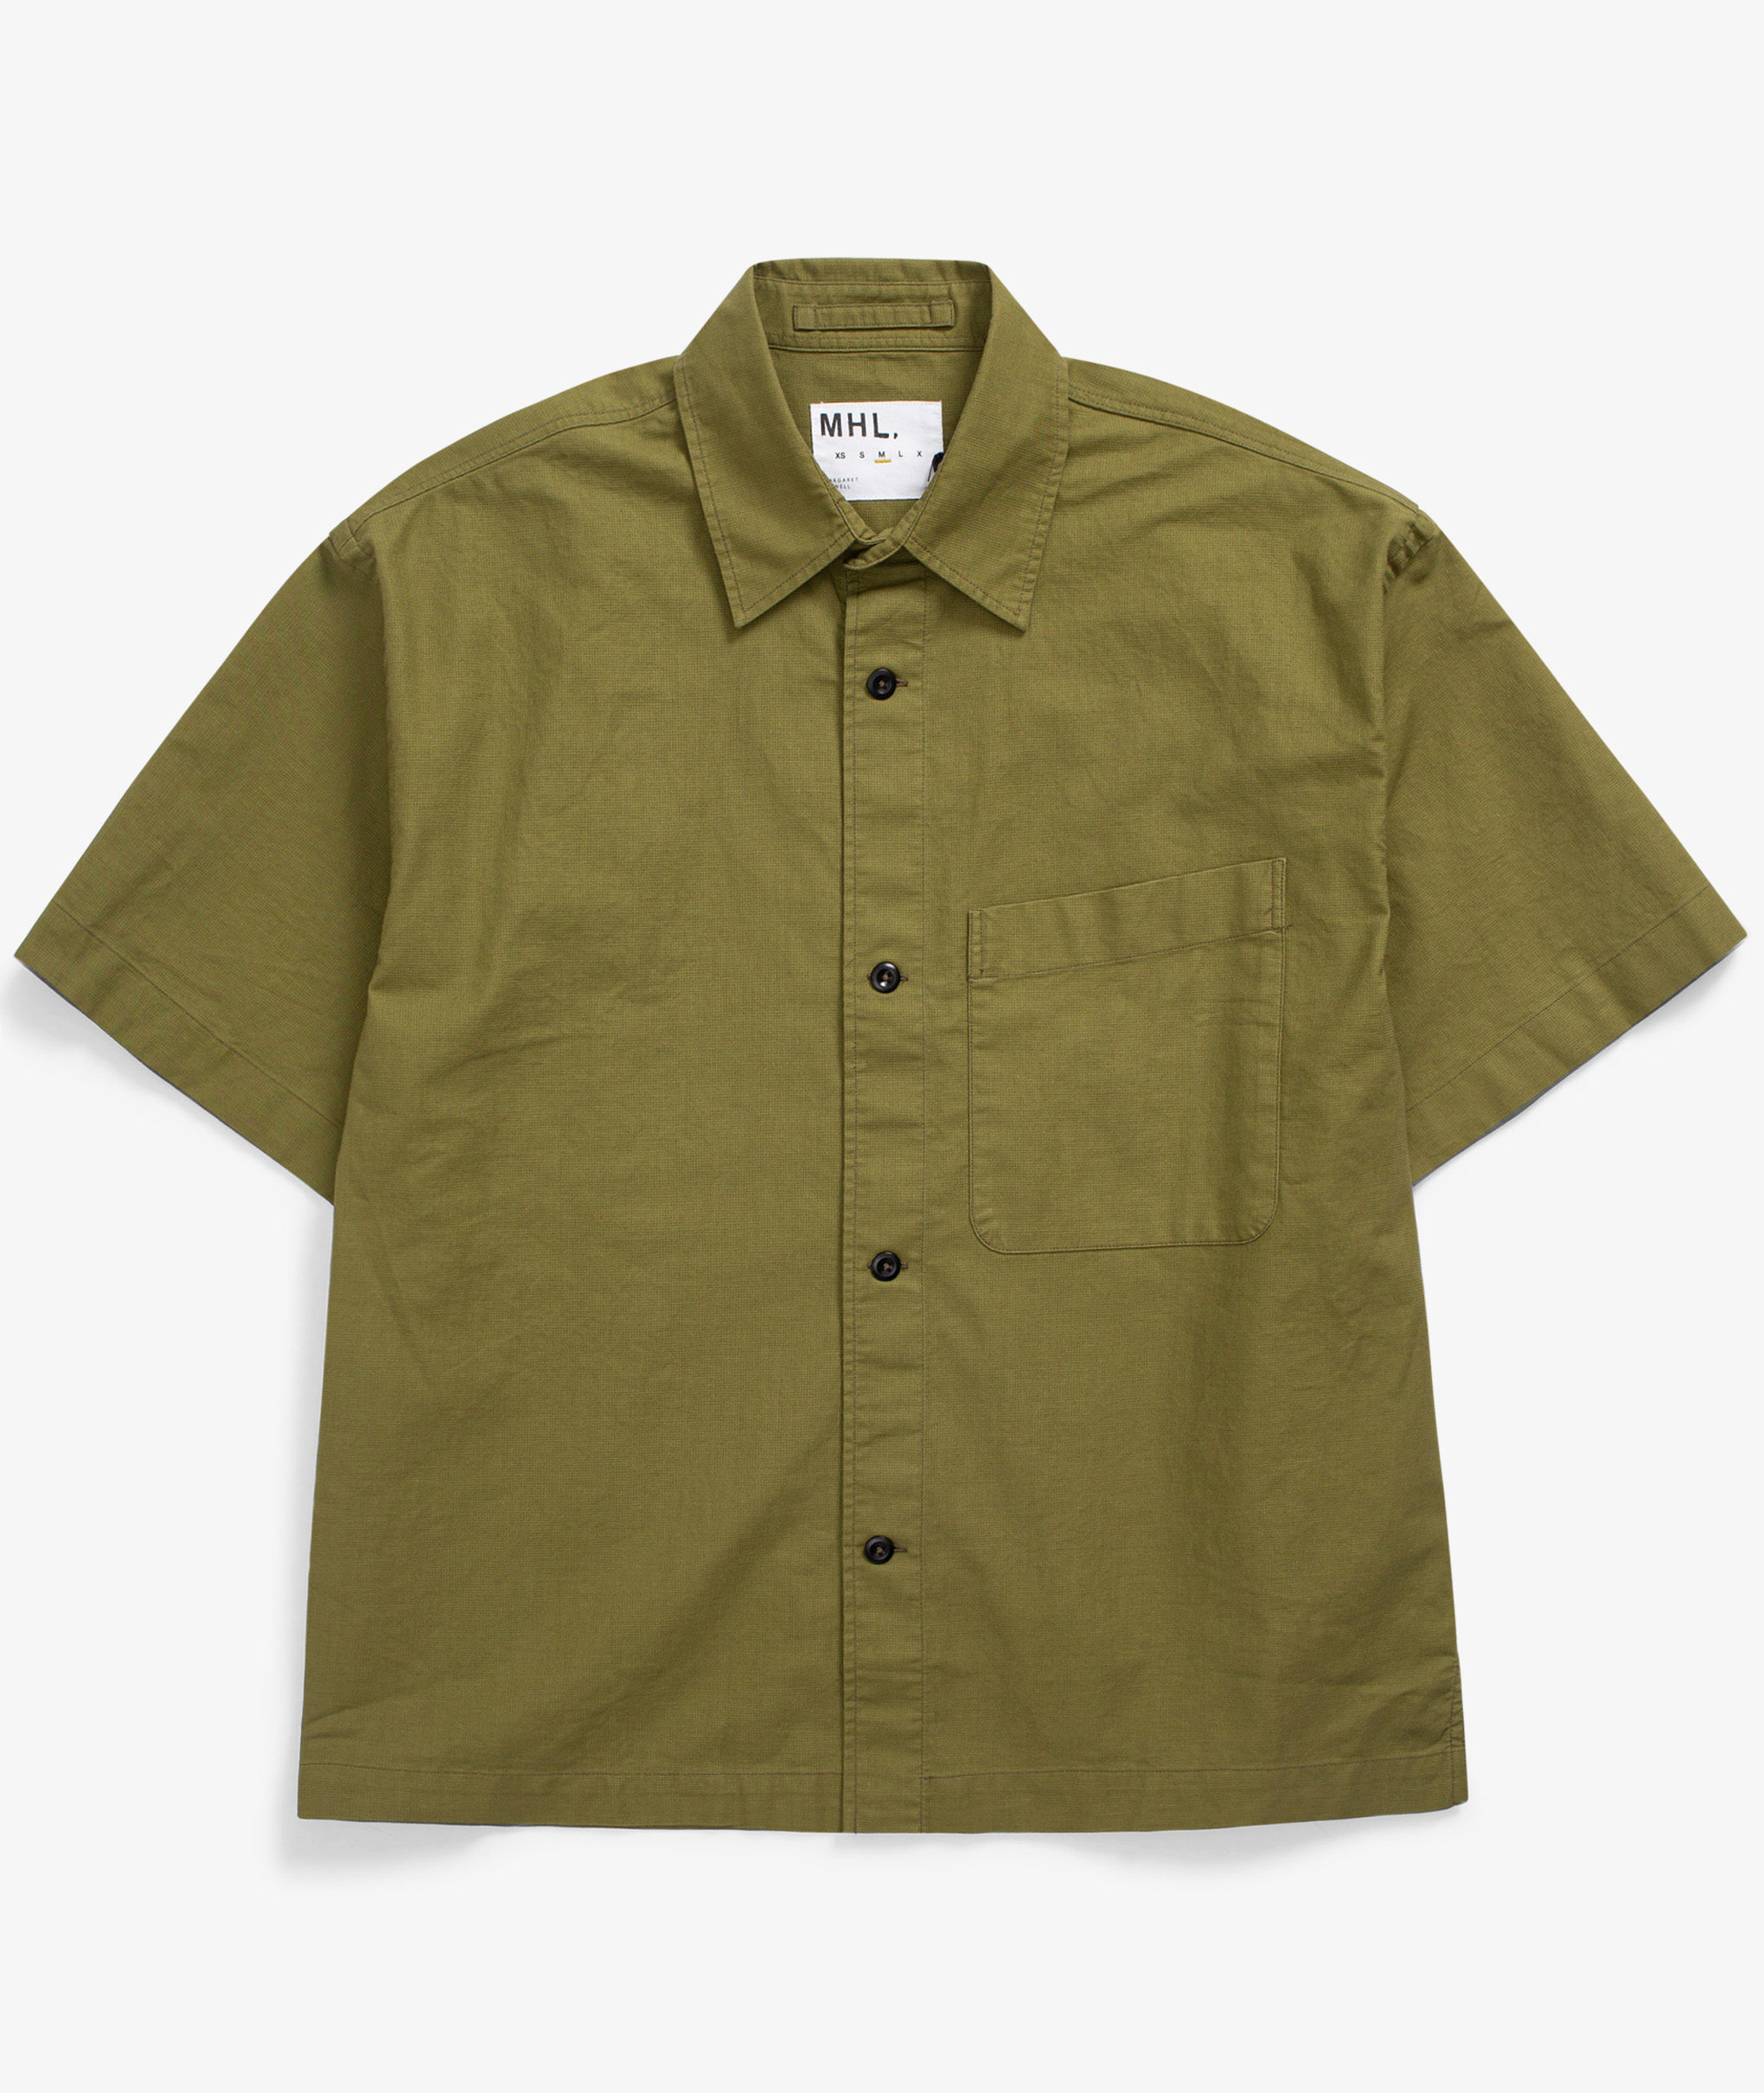 Norse Store | Shipping Worldwide - Margaret Howell MHL S/S Worker